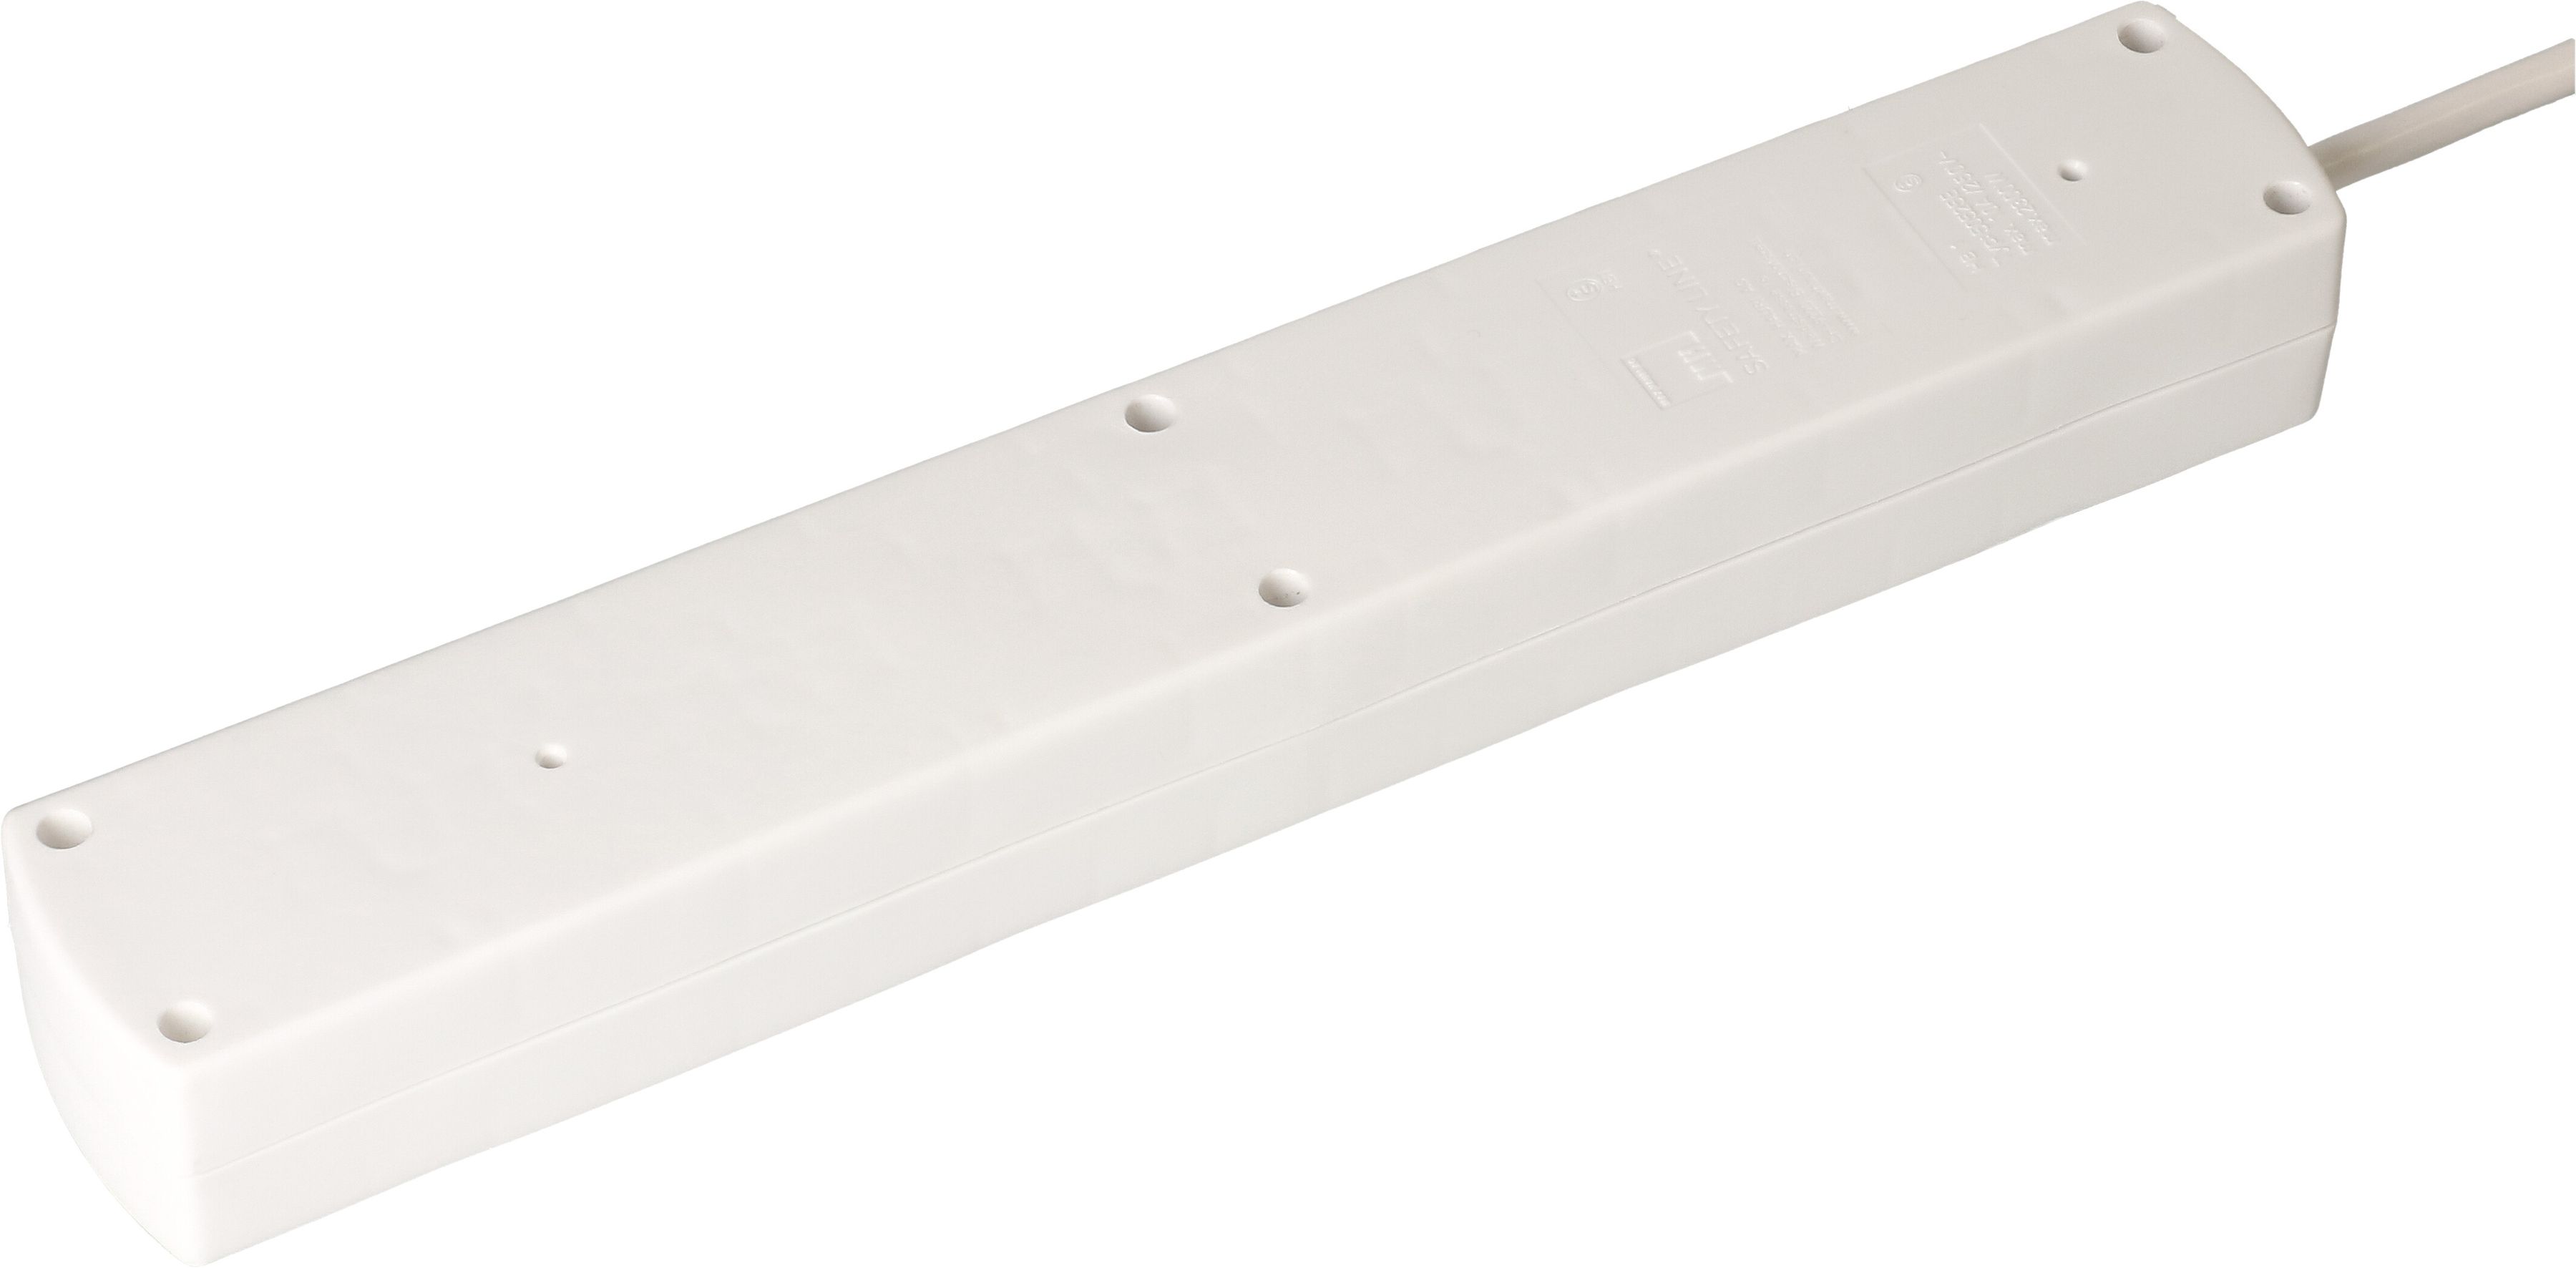 multiprise Safety Line 5x type 13 90° BS blanc interr. 2m cli.